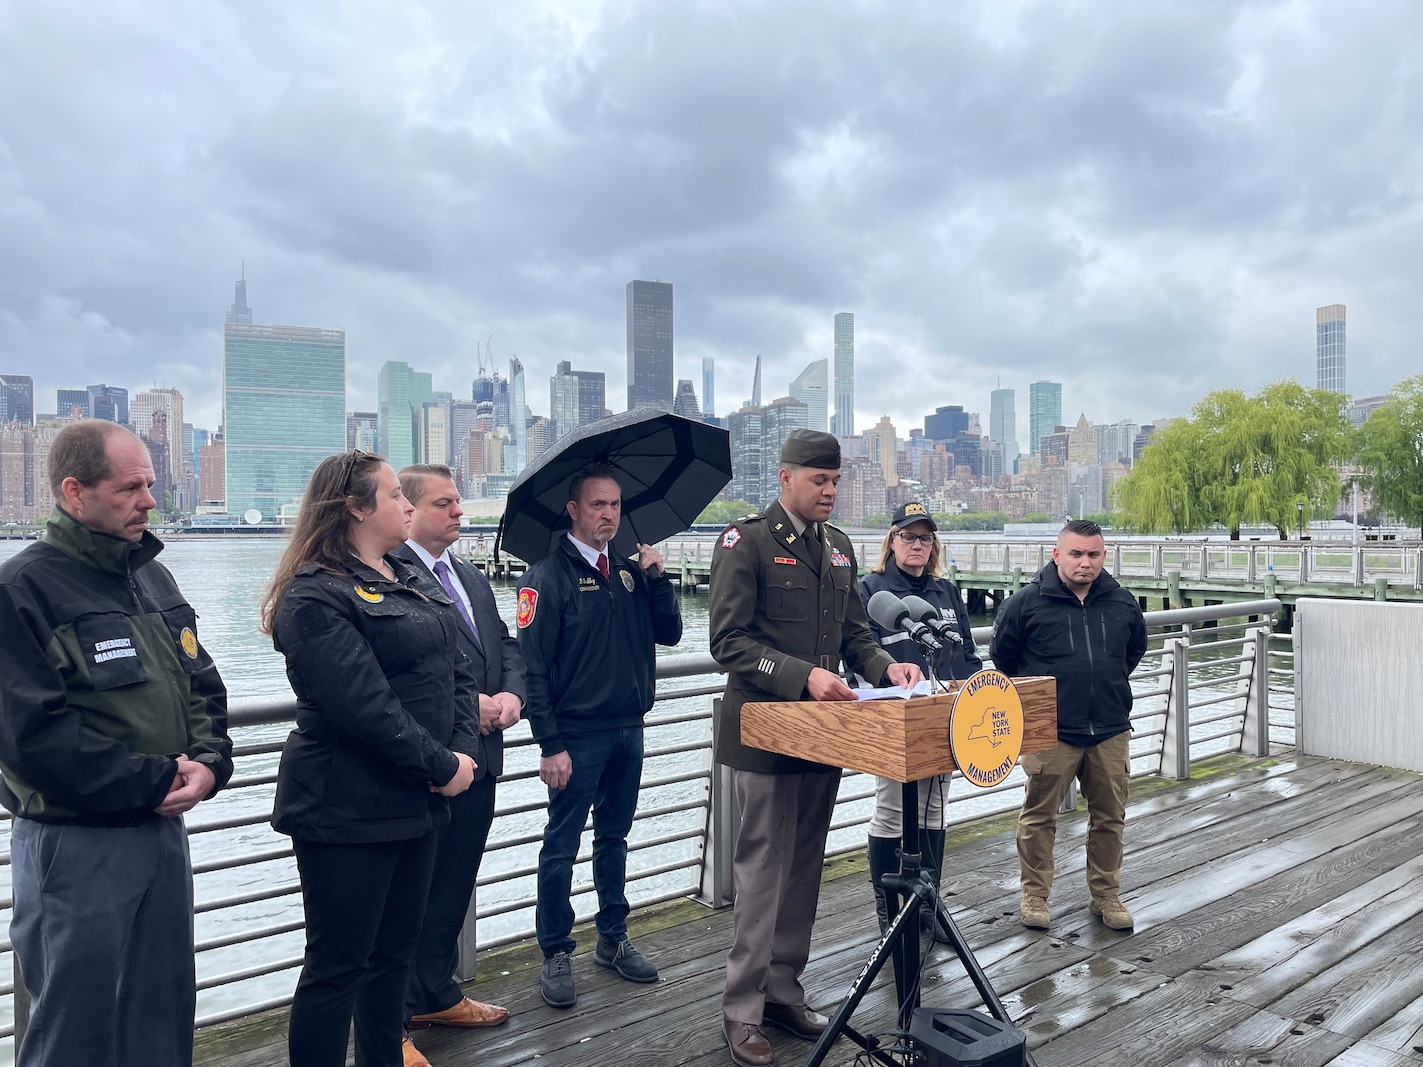 Lieutenant Colonel Matthew Pride, Deputy Commander, USACE, New York District, speaks about National Hurricane Preparedness Week at a press event in Queens, NY.